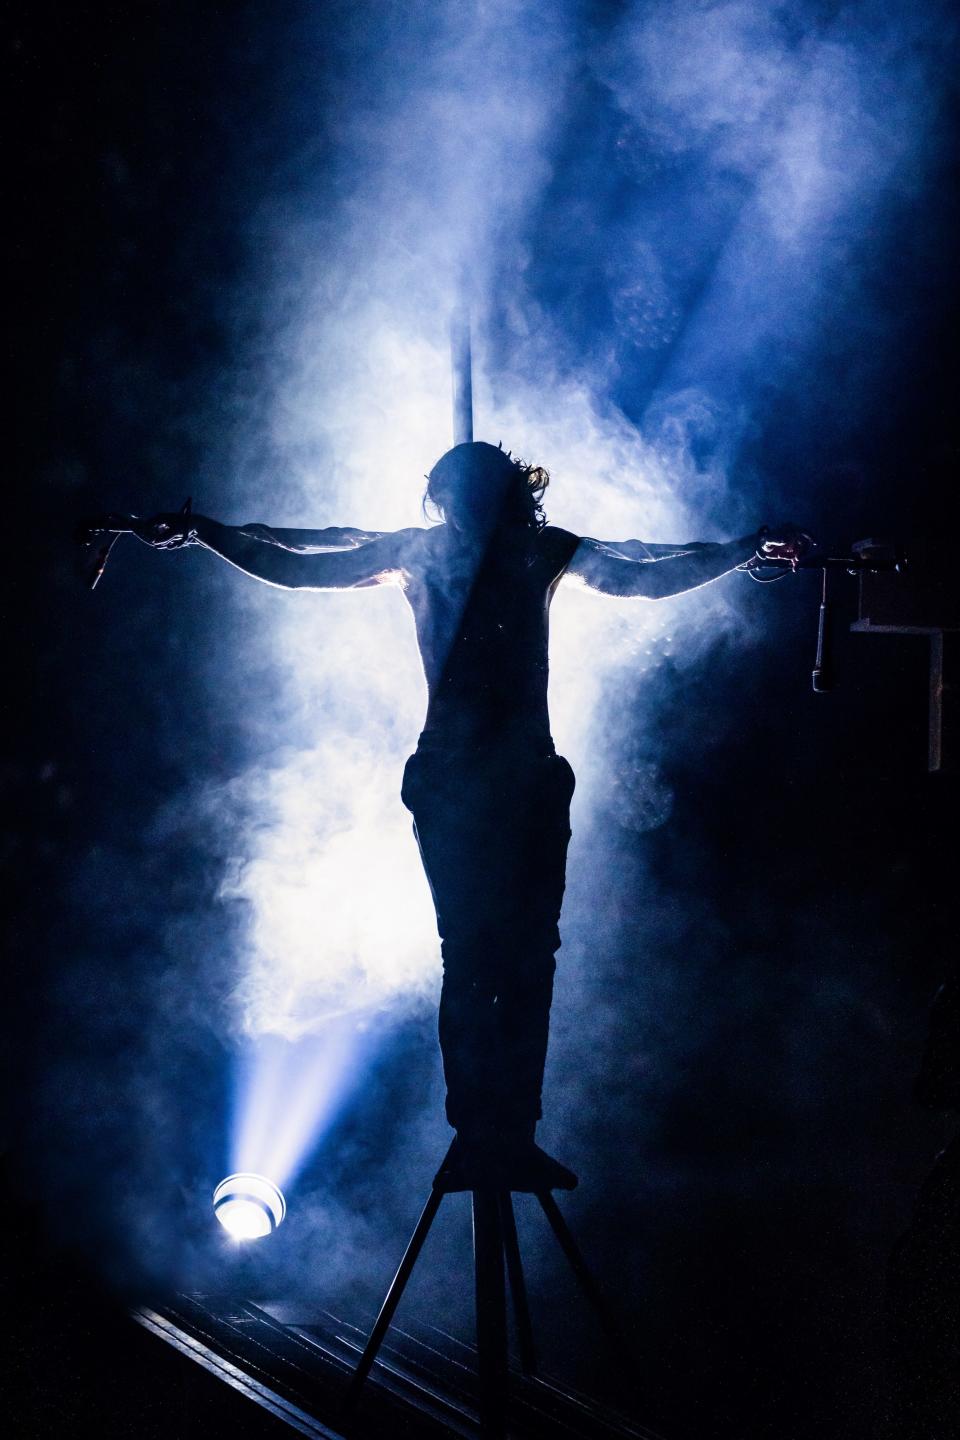 Jack Hopewell as Jesus in the North American tour of “Jesus Christ Superstar.”